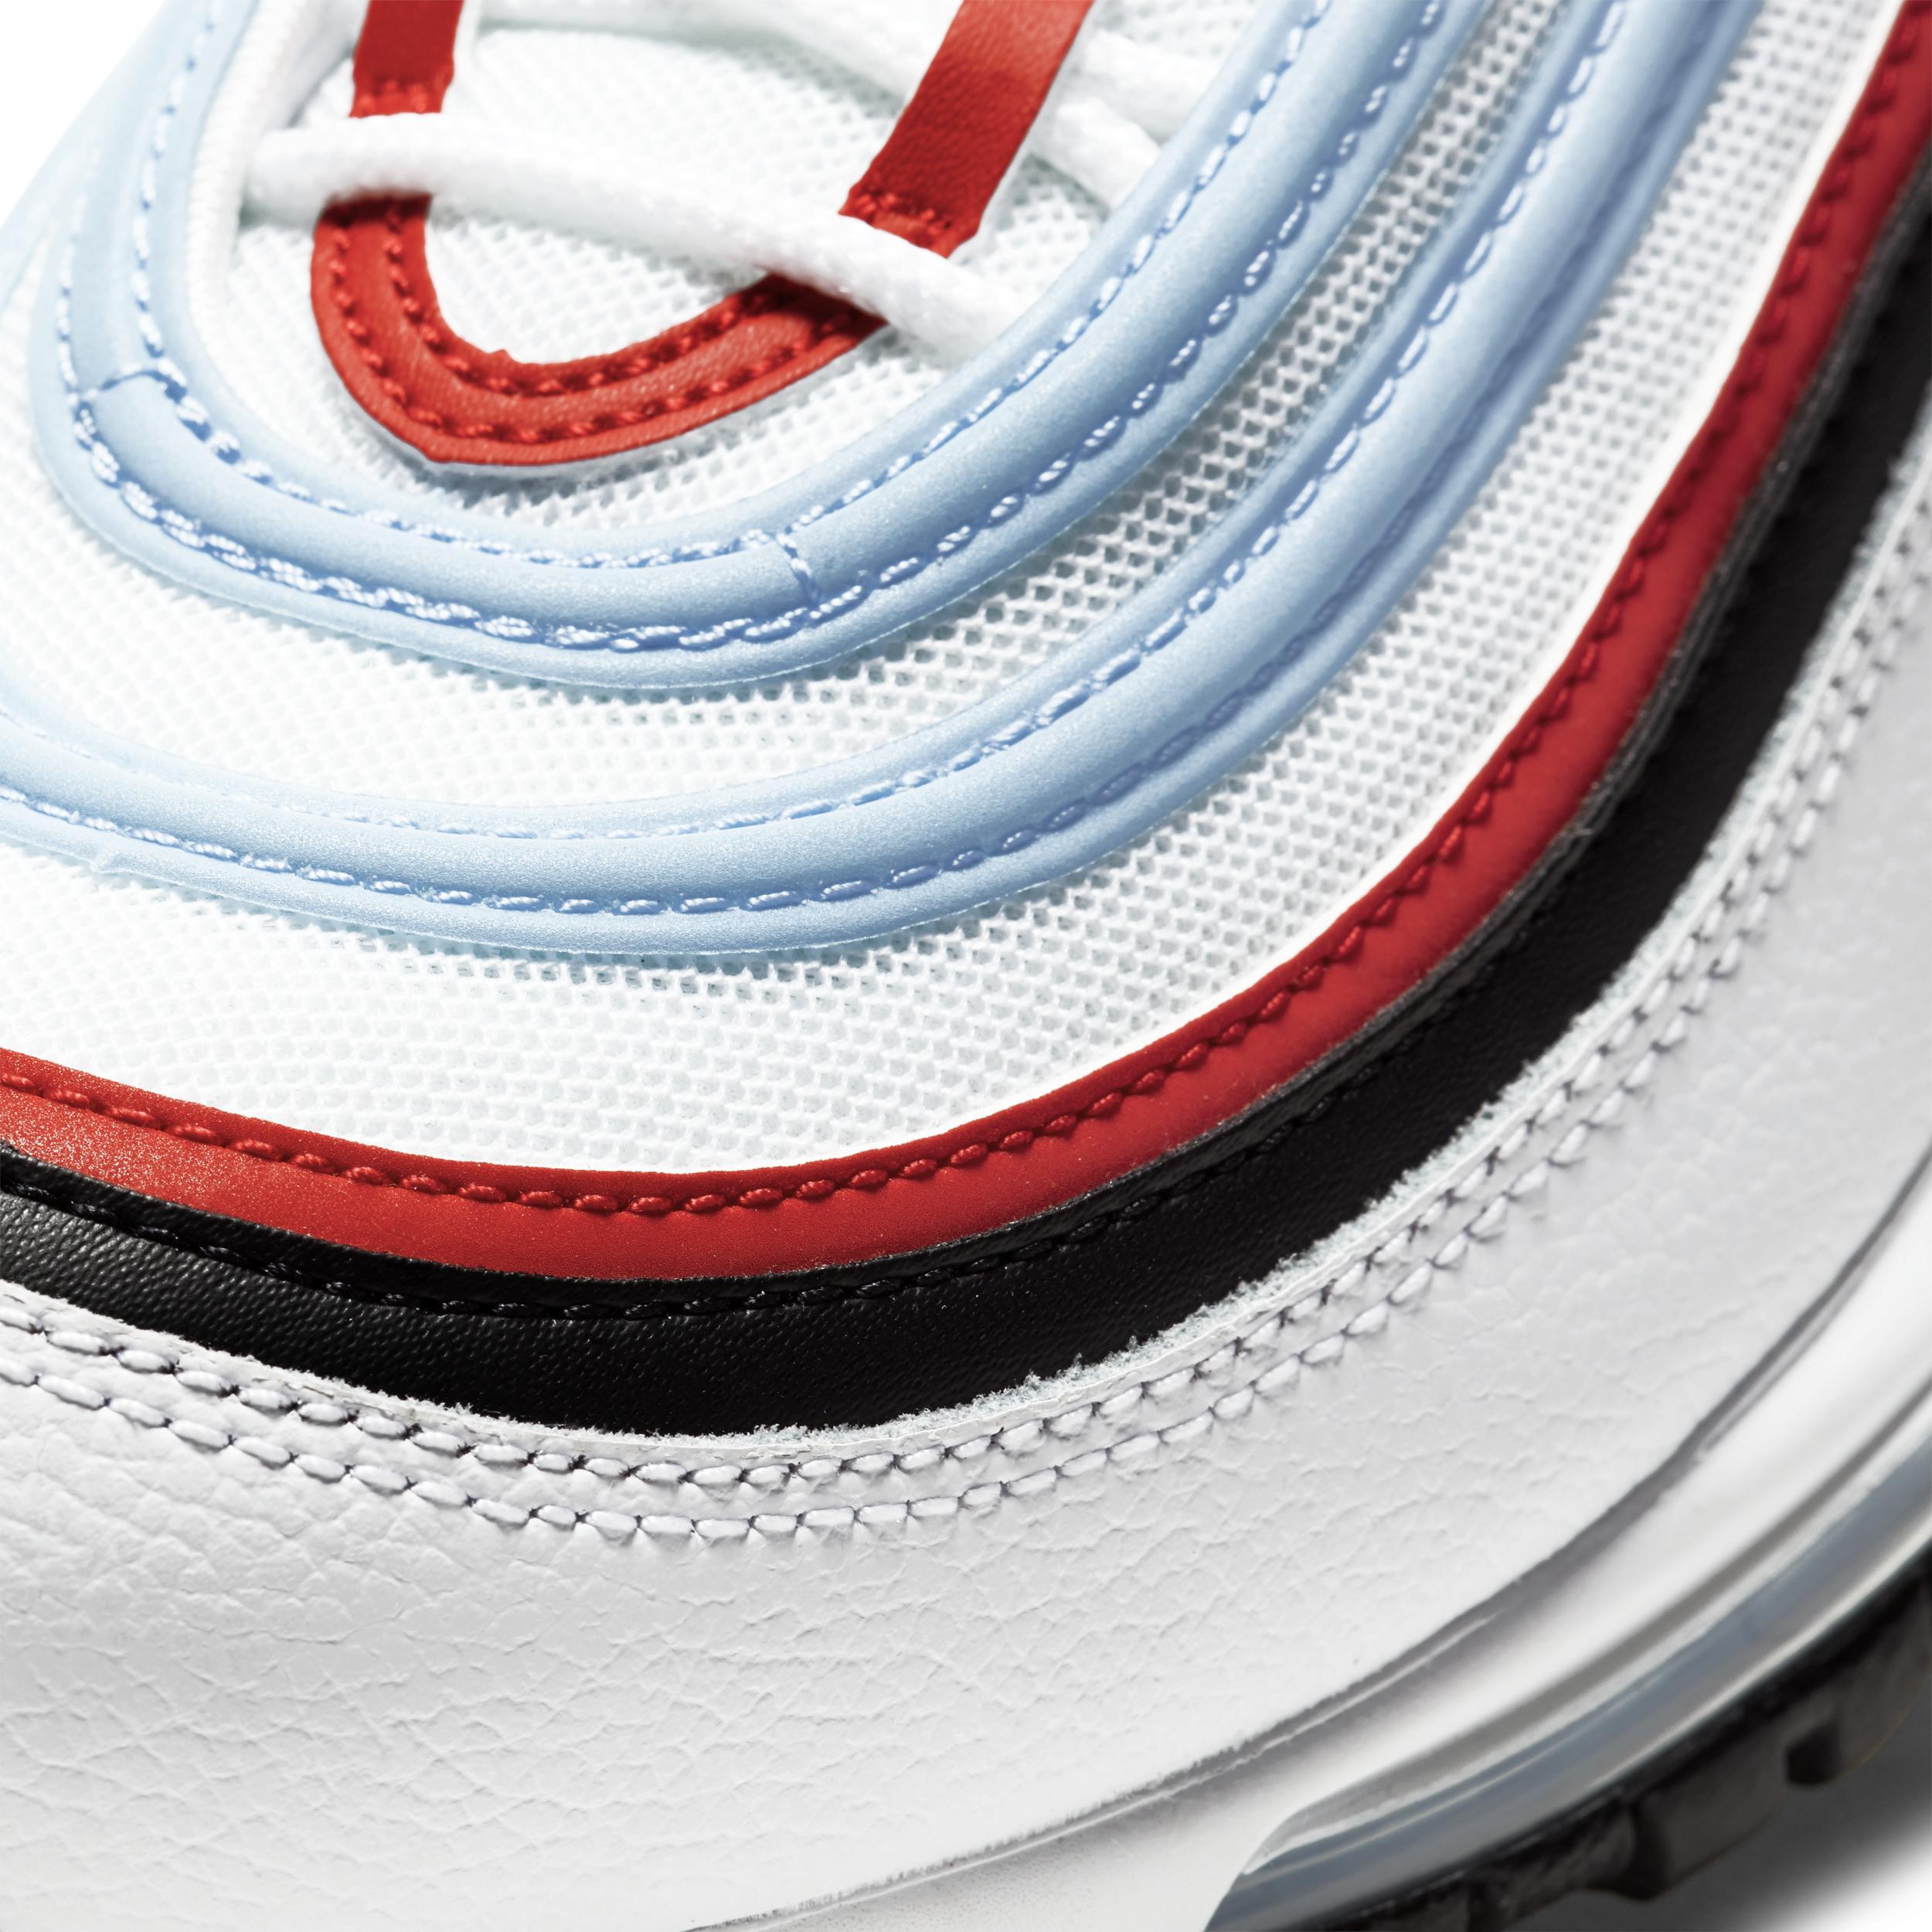 Nike Men's Air Max 97 Shoes Product Image